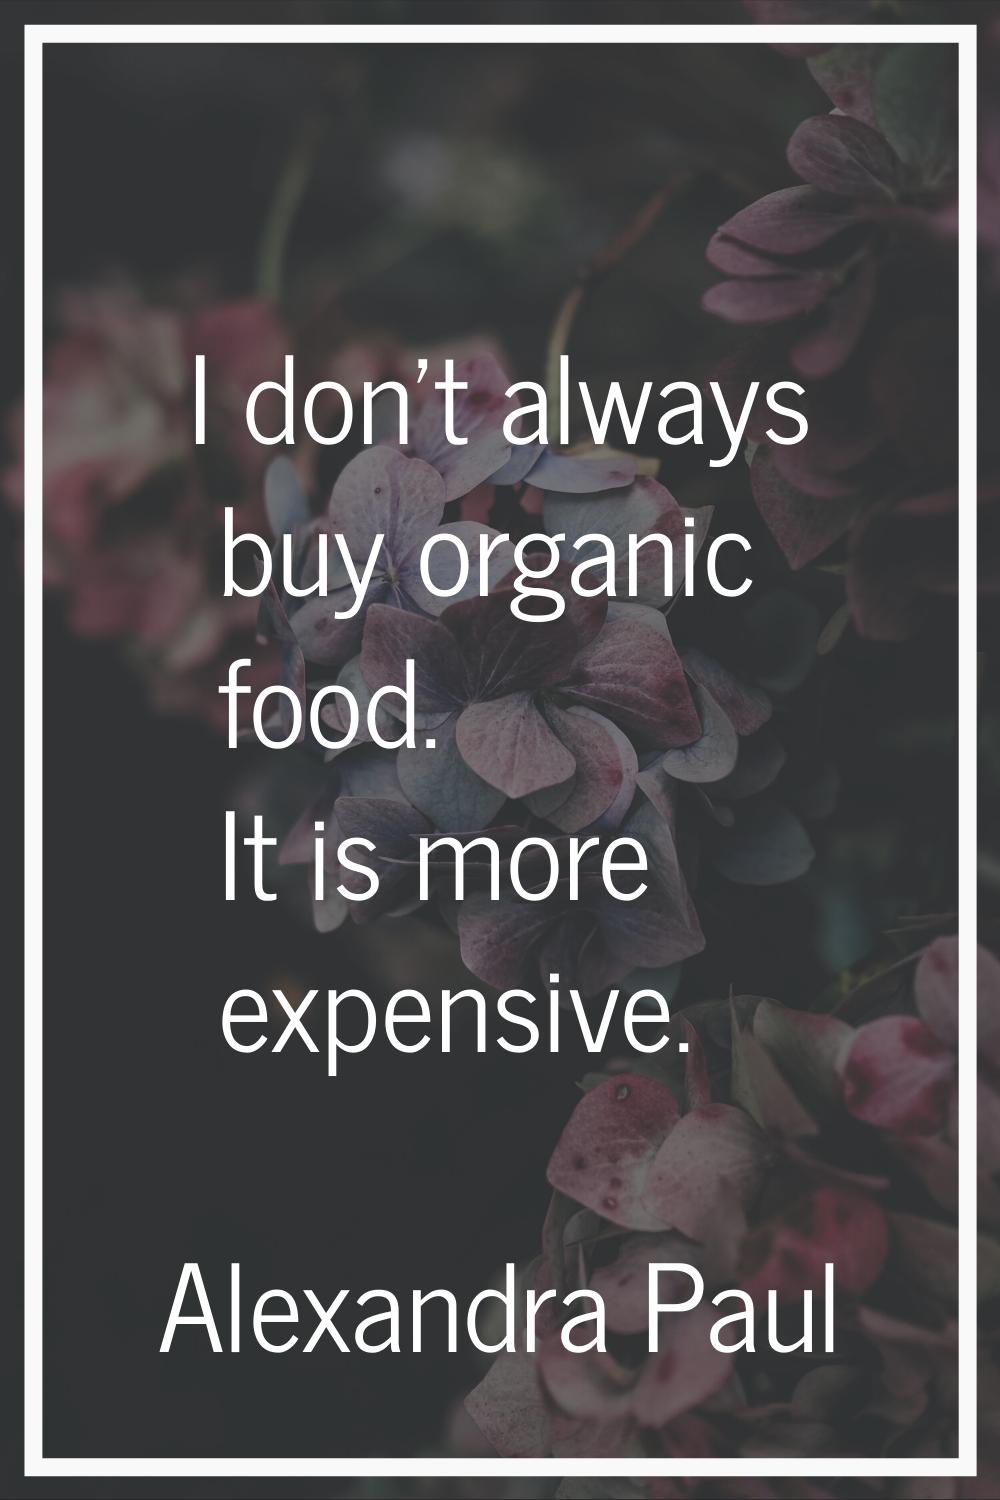 I don't always buy organic food. It is more expensive.